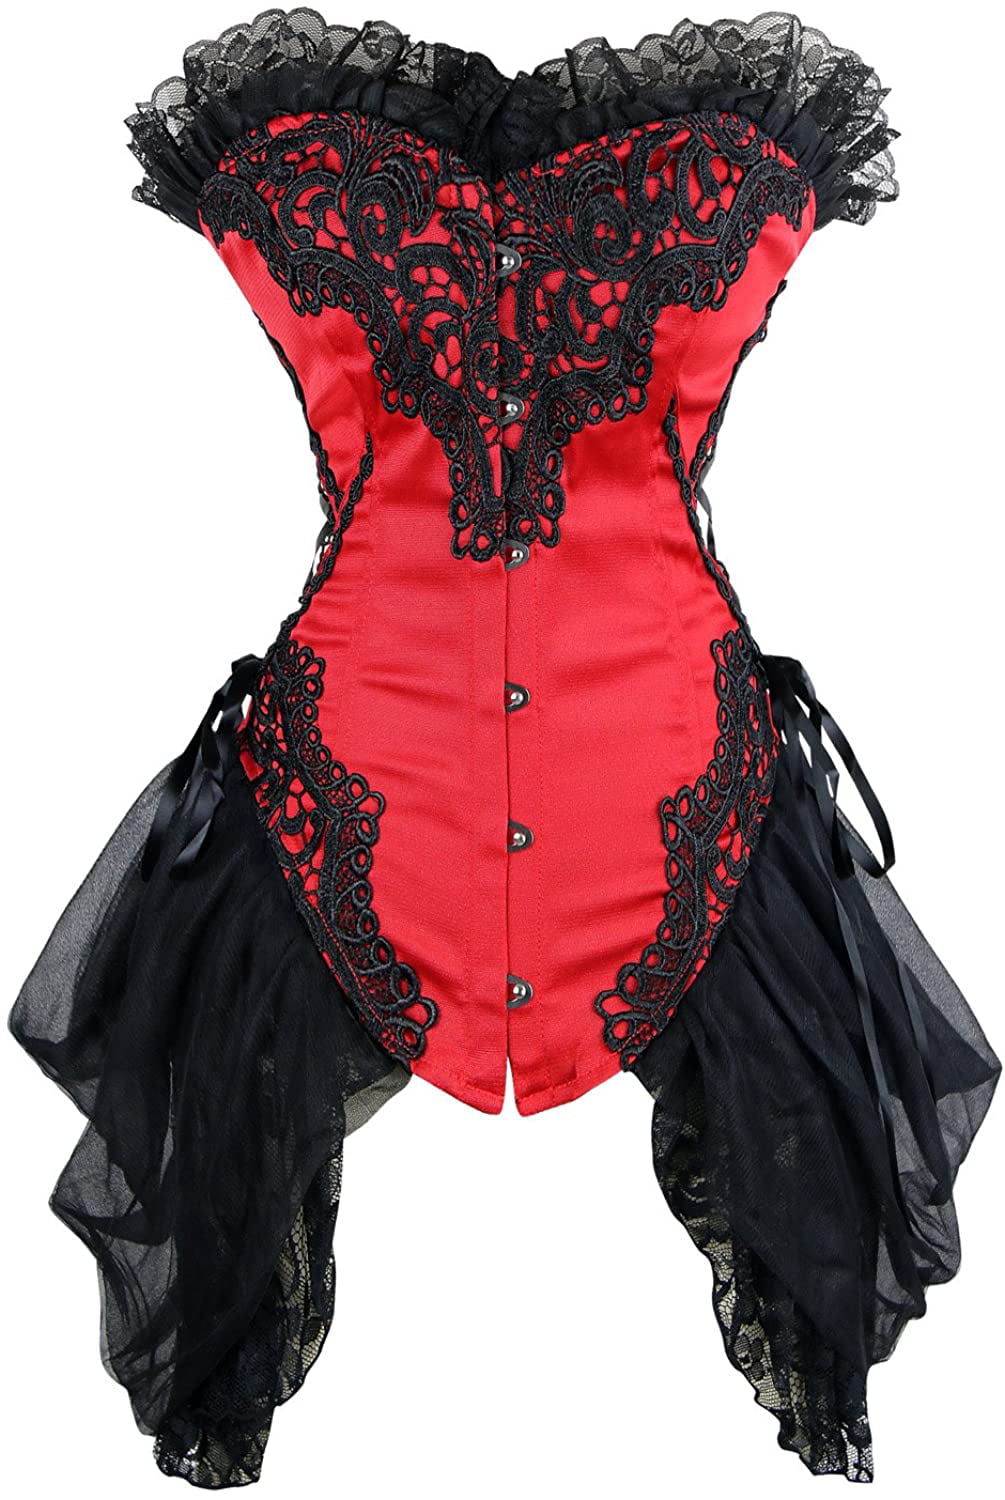 Womens Bustier Corset Top Gothic Lace Up Body Shaper Floral Overbust with Ruffled Sleeves Lace Bodysuits Lolita Style